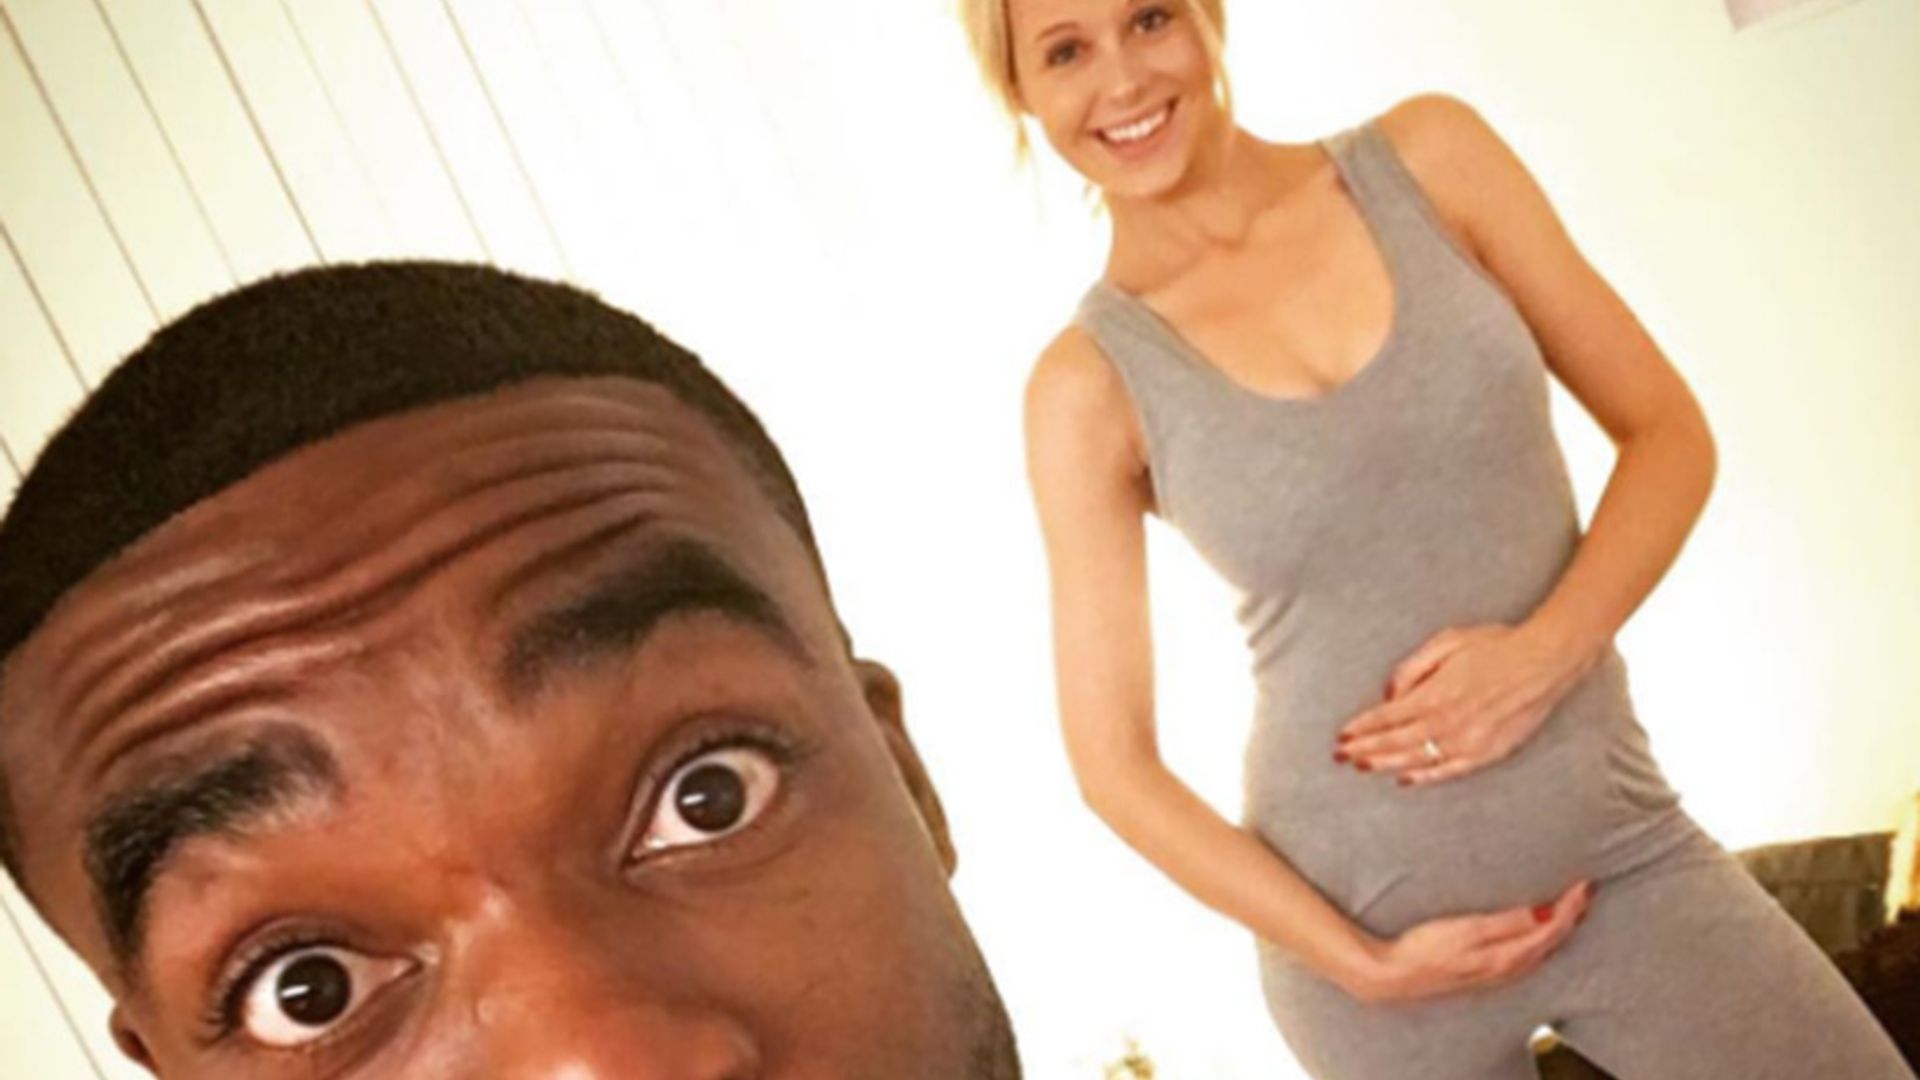 Strictly Come Dancing winner Ore Oduba and wife Portia expecting their first child